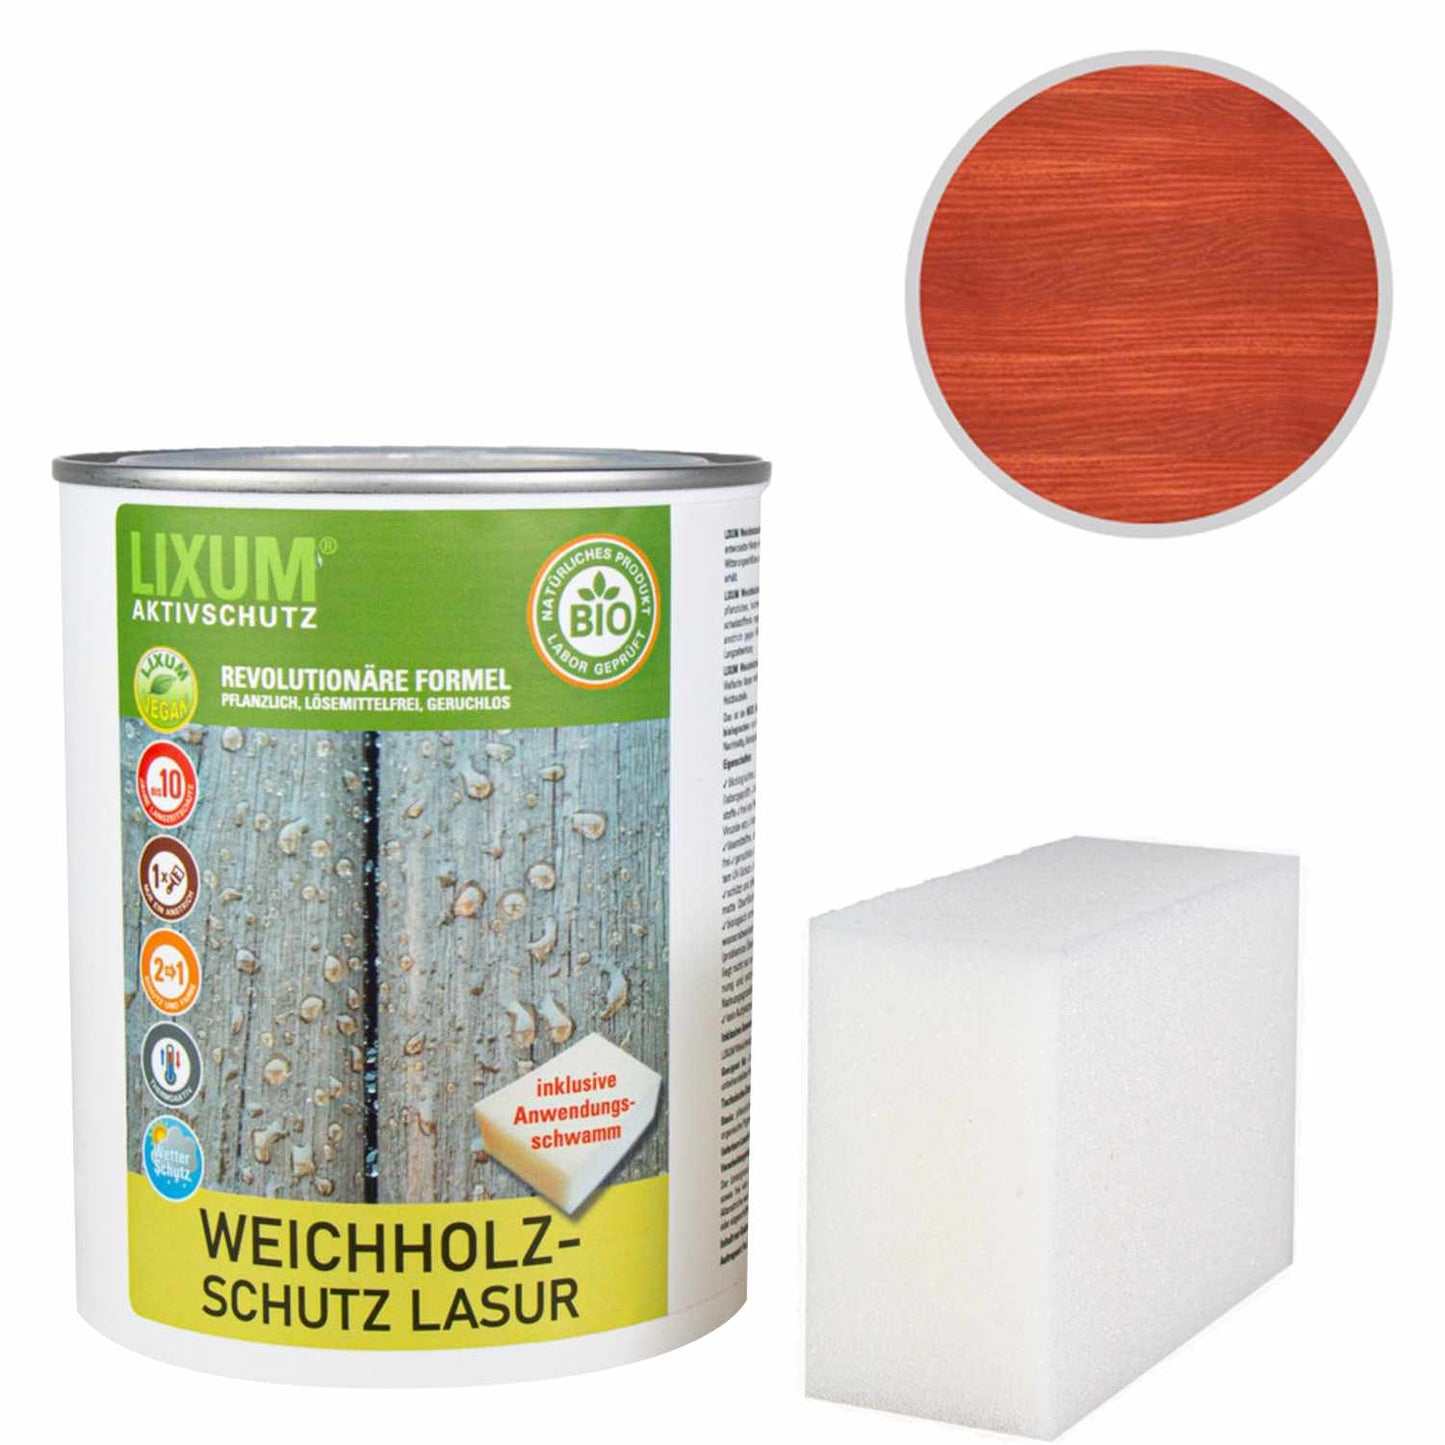 Biological wood protection softwood protection glaze - fir - wood protection & wood care for outside